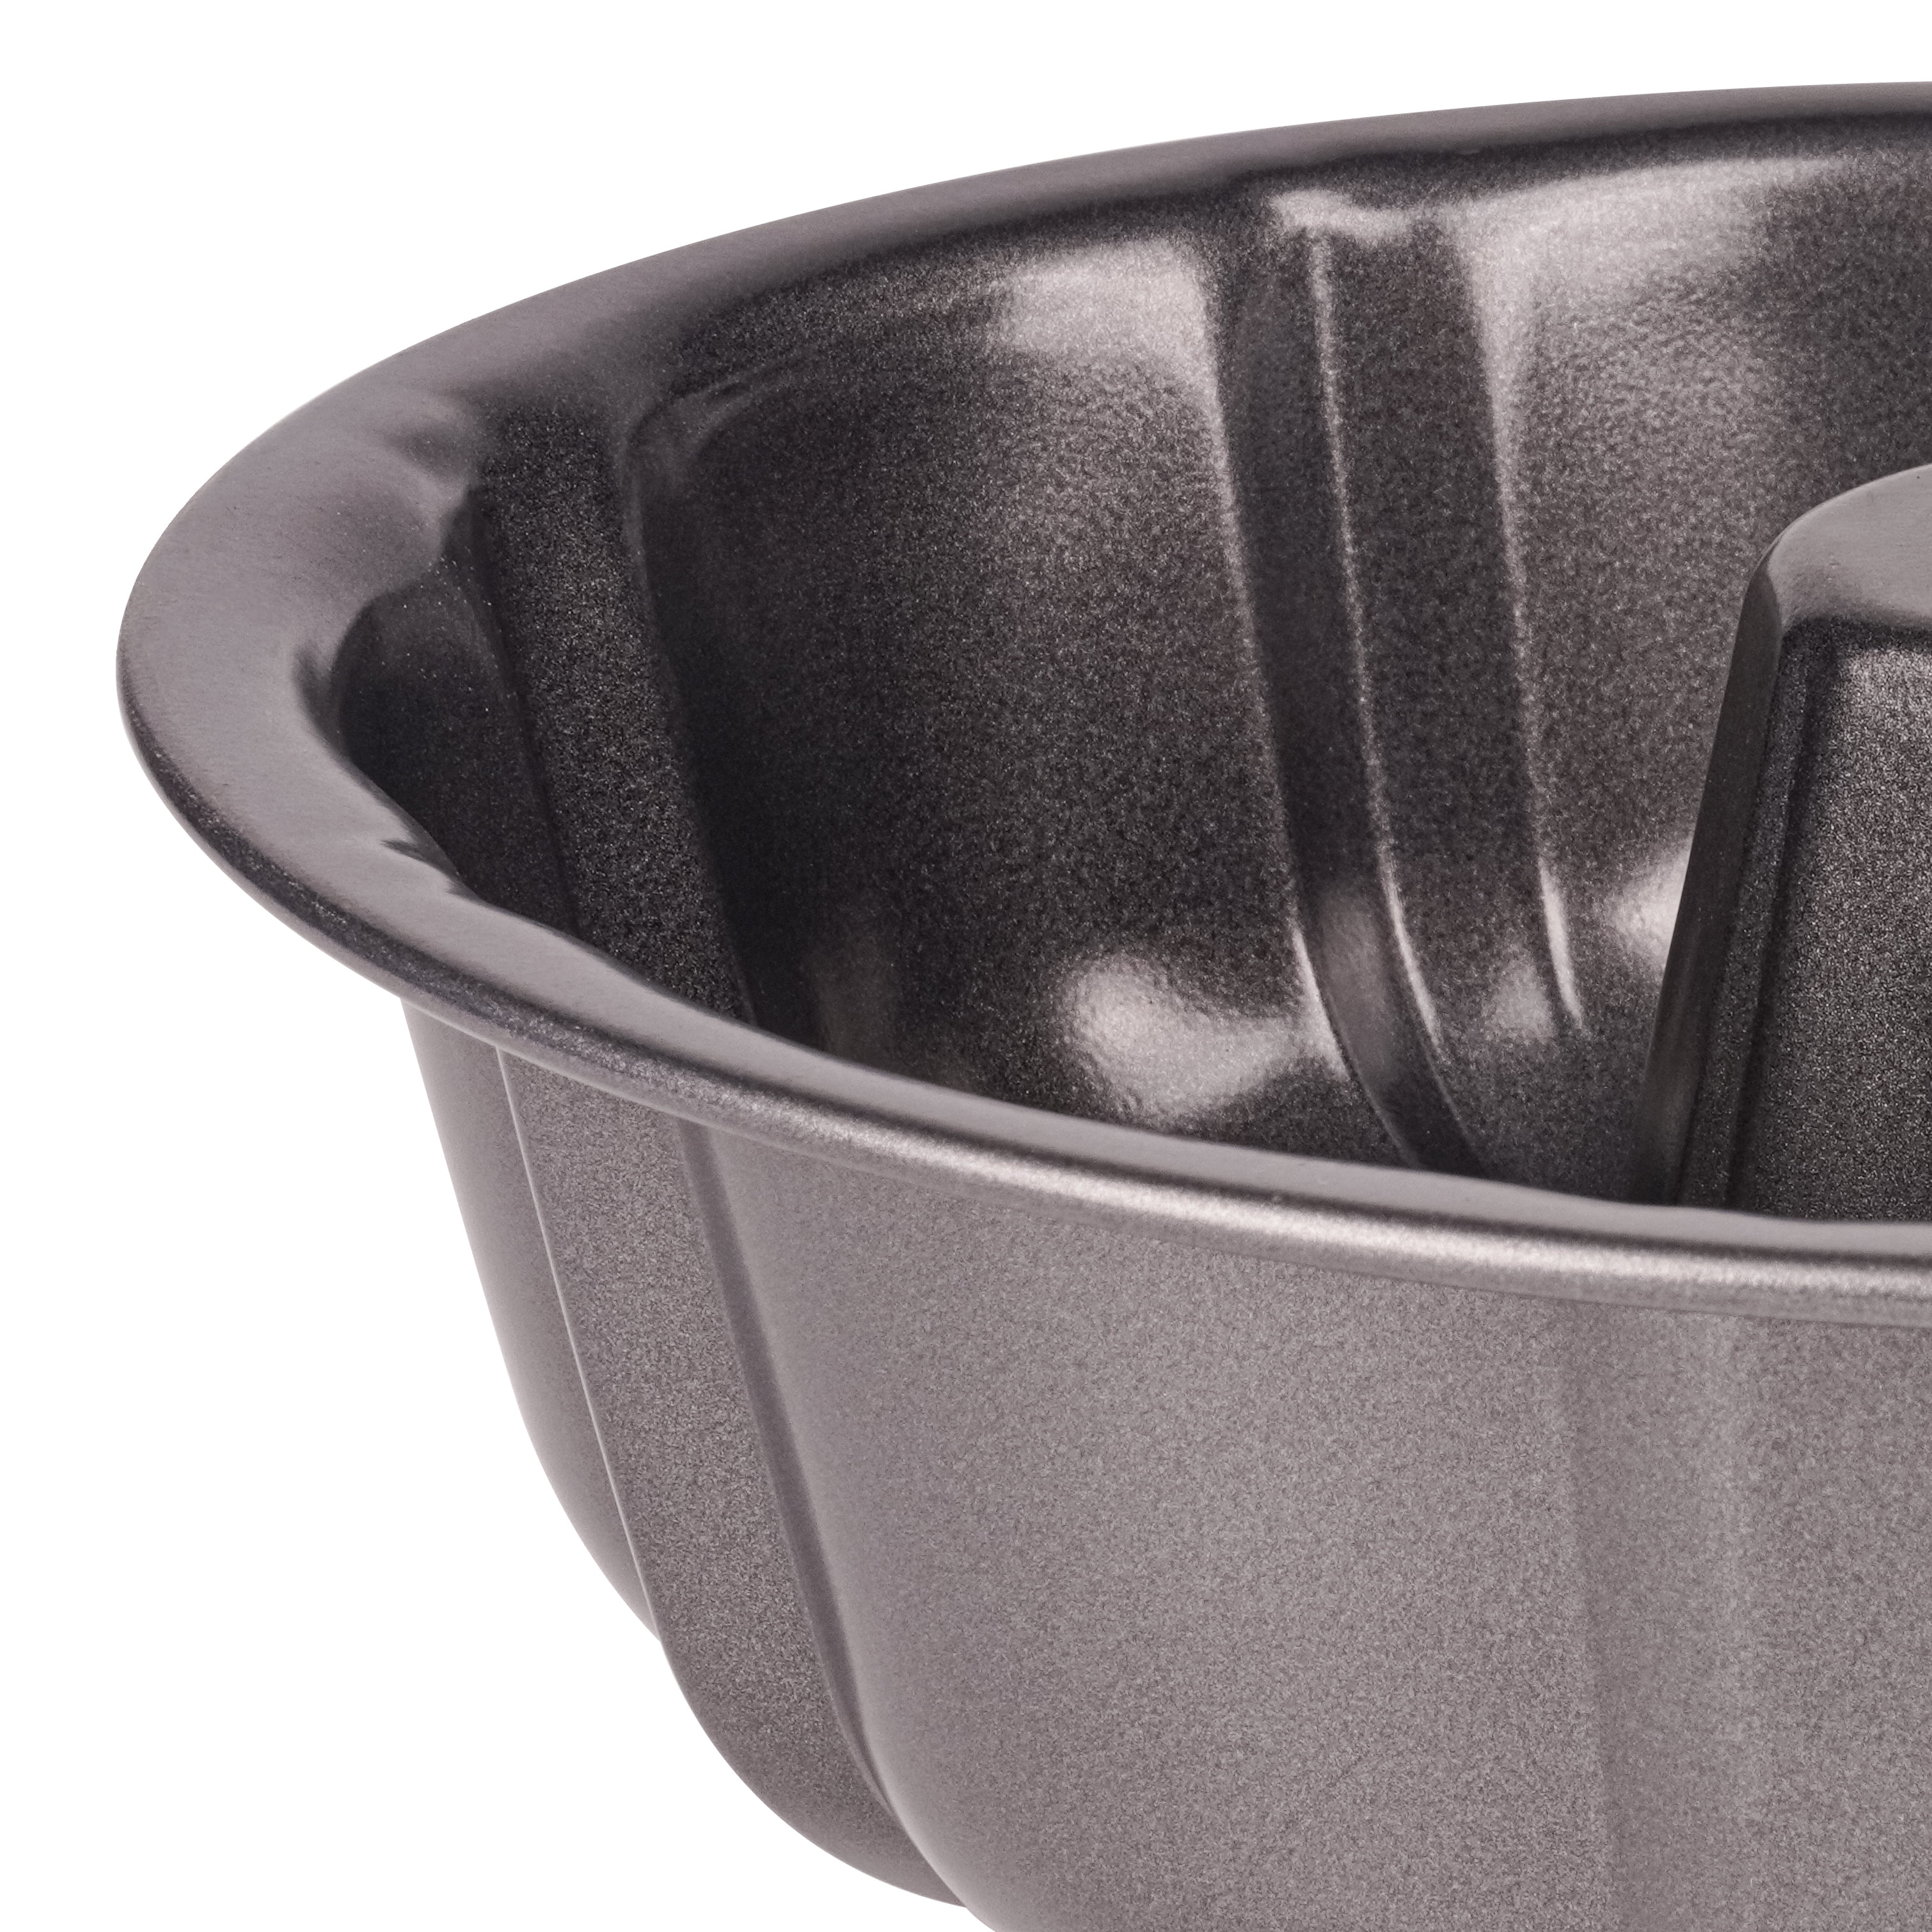 Chicago Metallic Nonstick Fluted Cake Pan, Perfect for Bundt cakes, monkey  breads, casseroles, lasagnas, and more! 10-Inch, Gray